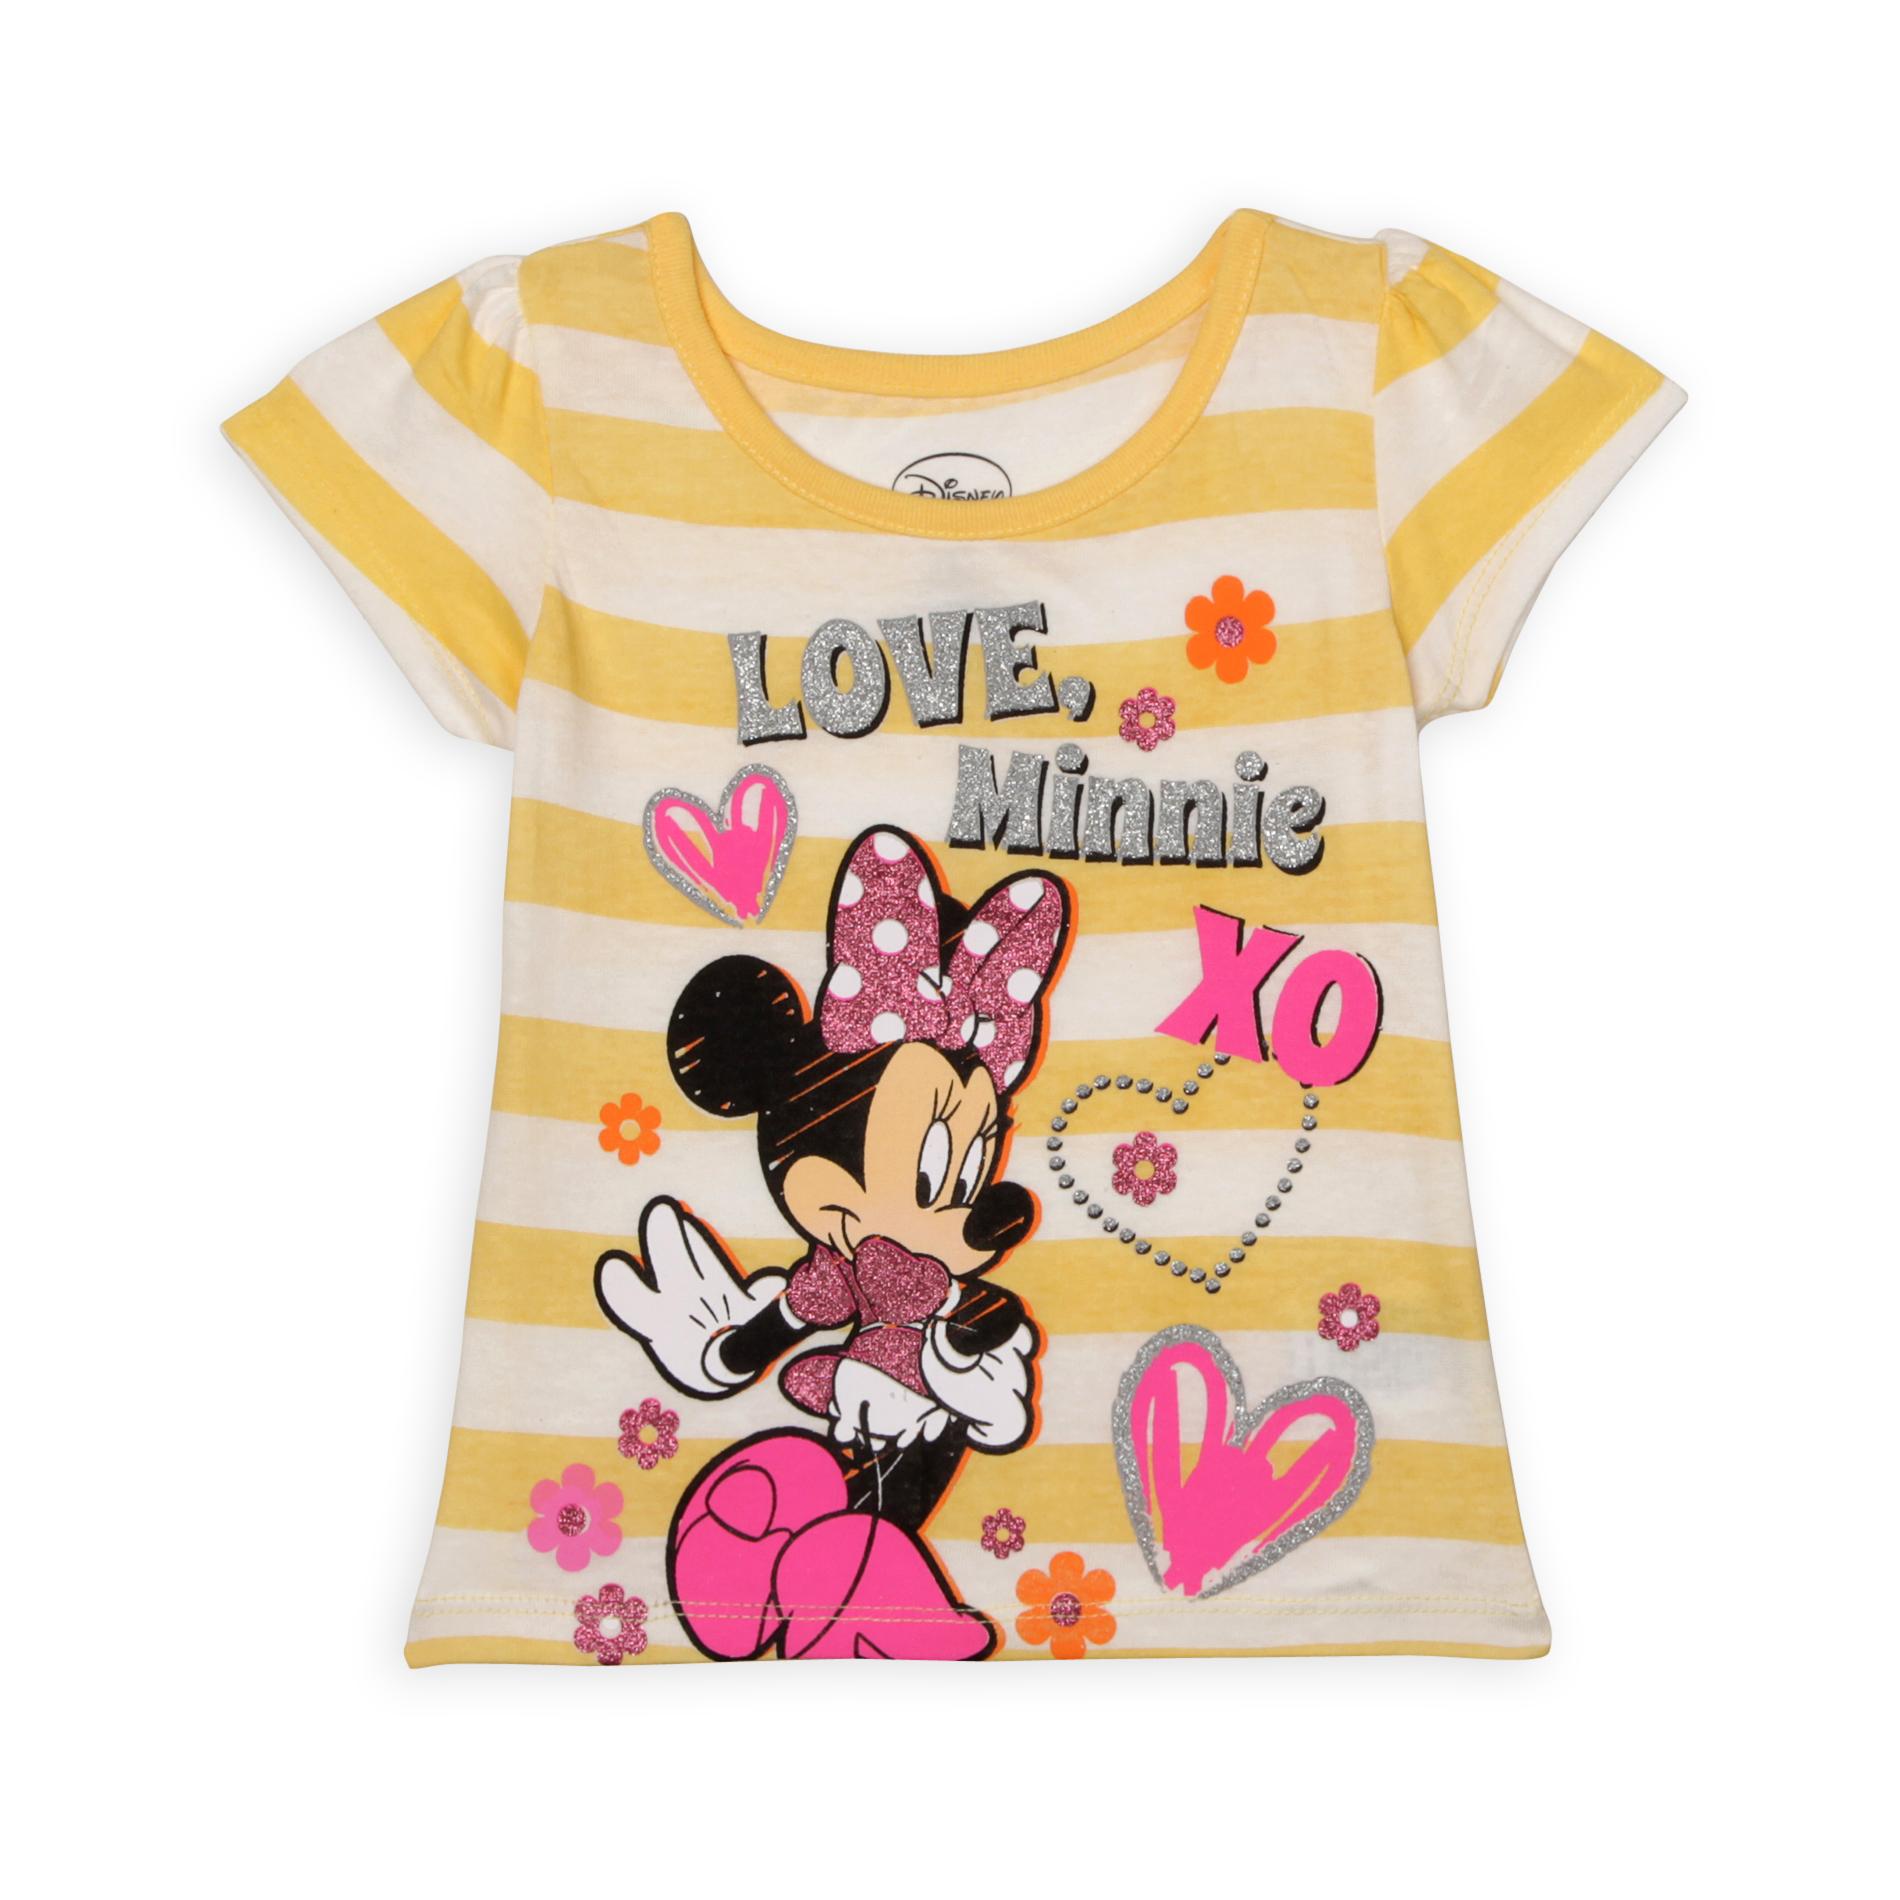 Disney Toddler Girl's Graphic Top - Minnie Mouse